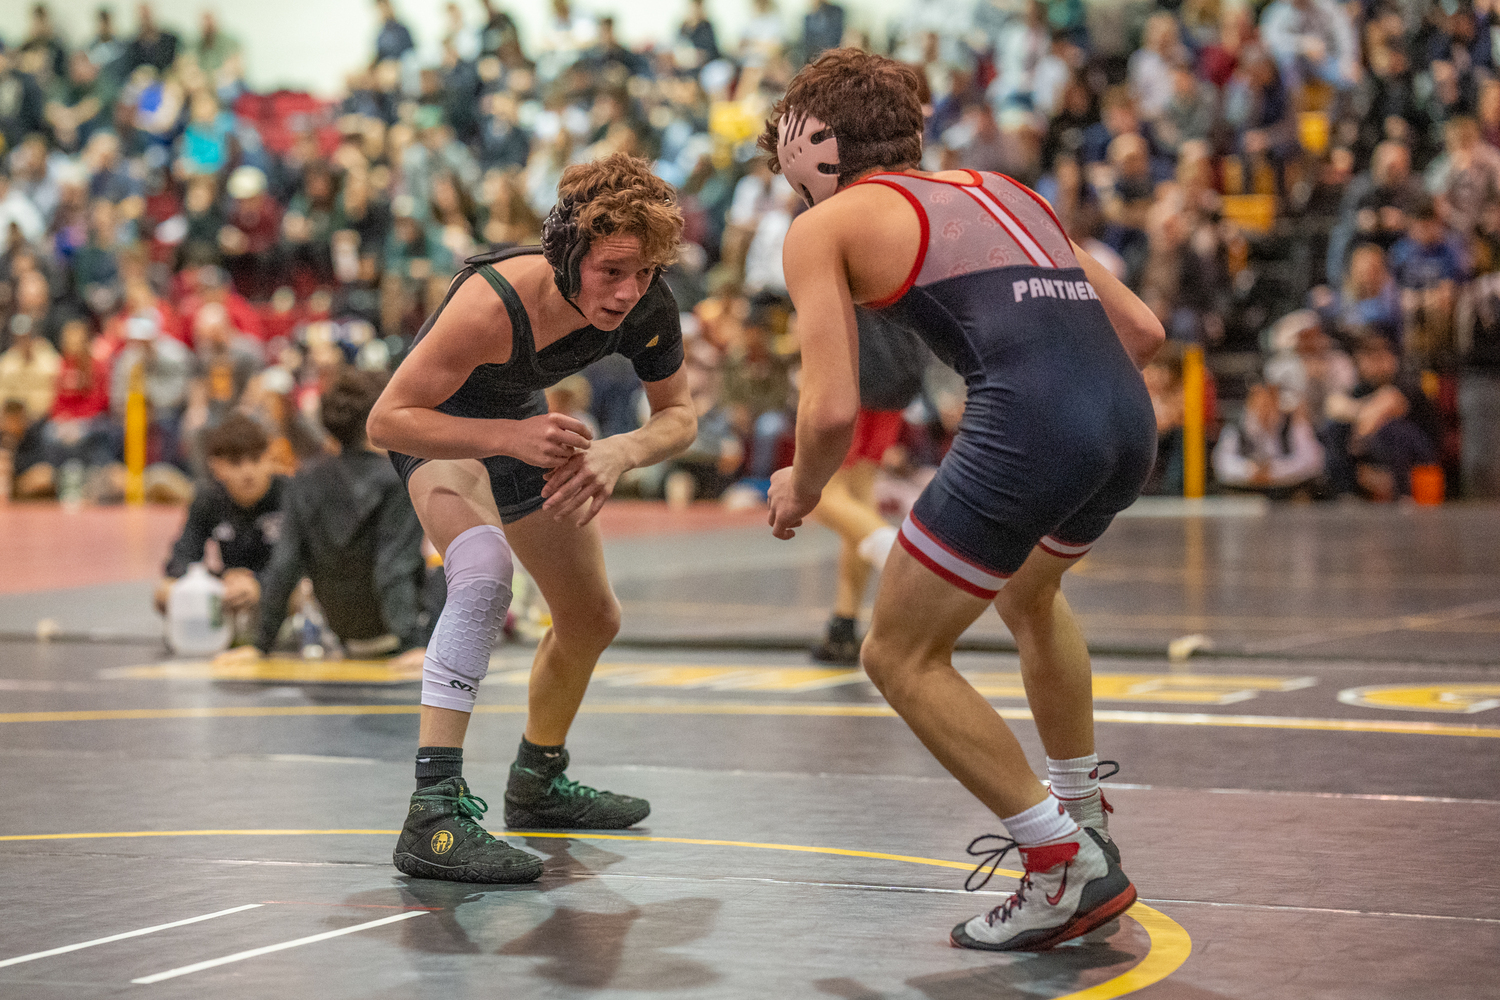 Freshman Nate Cangelosi was one of three placewinners on Saturday for the Hurricanes at the Paul Dilorio Memorial Tournament at Sachem East High School. RON ESPOSITO